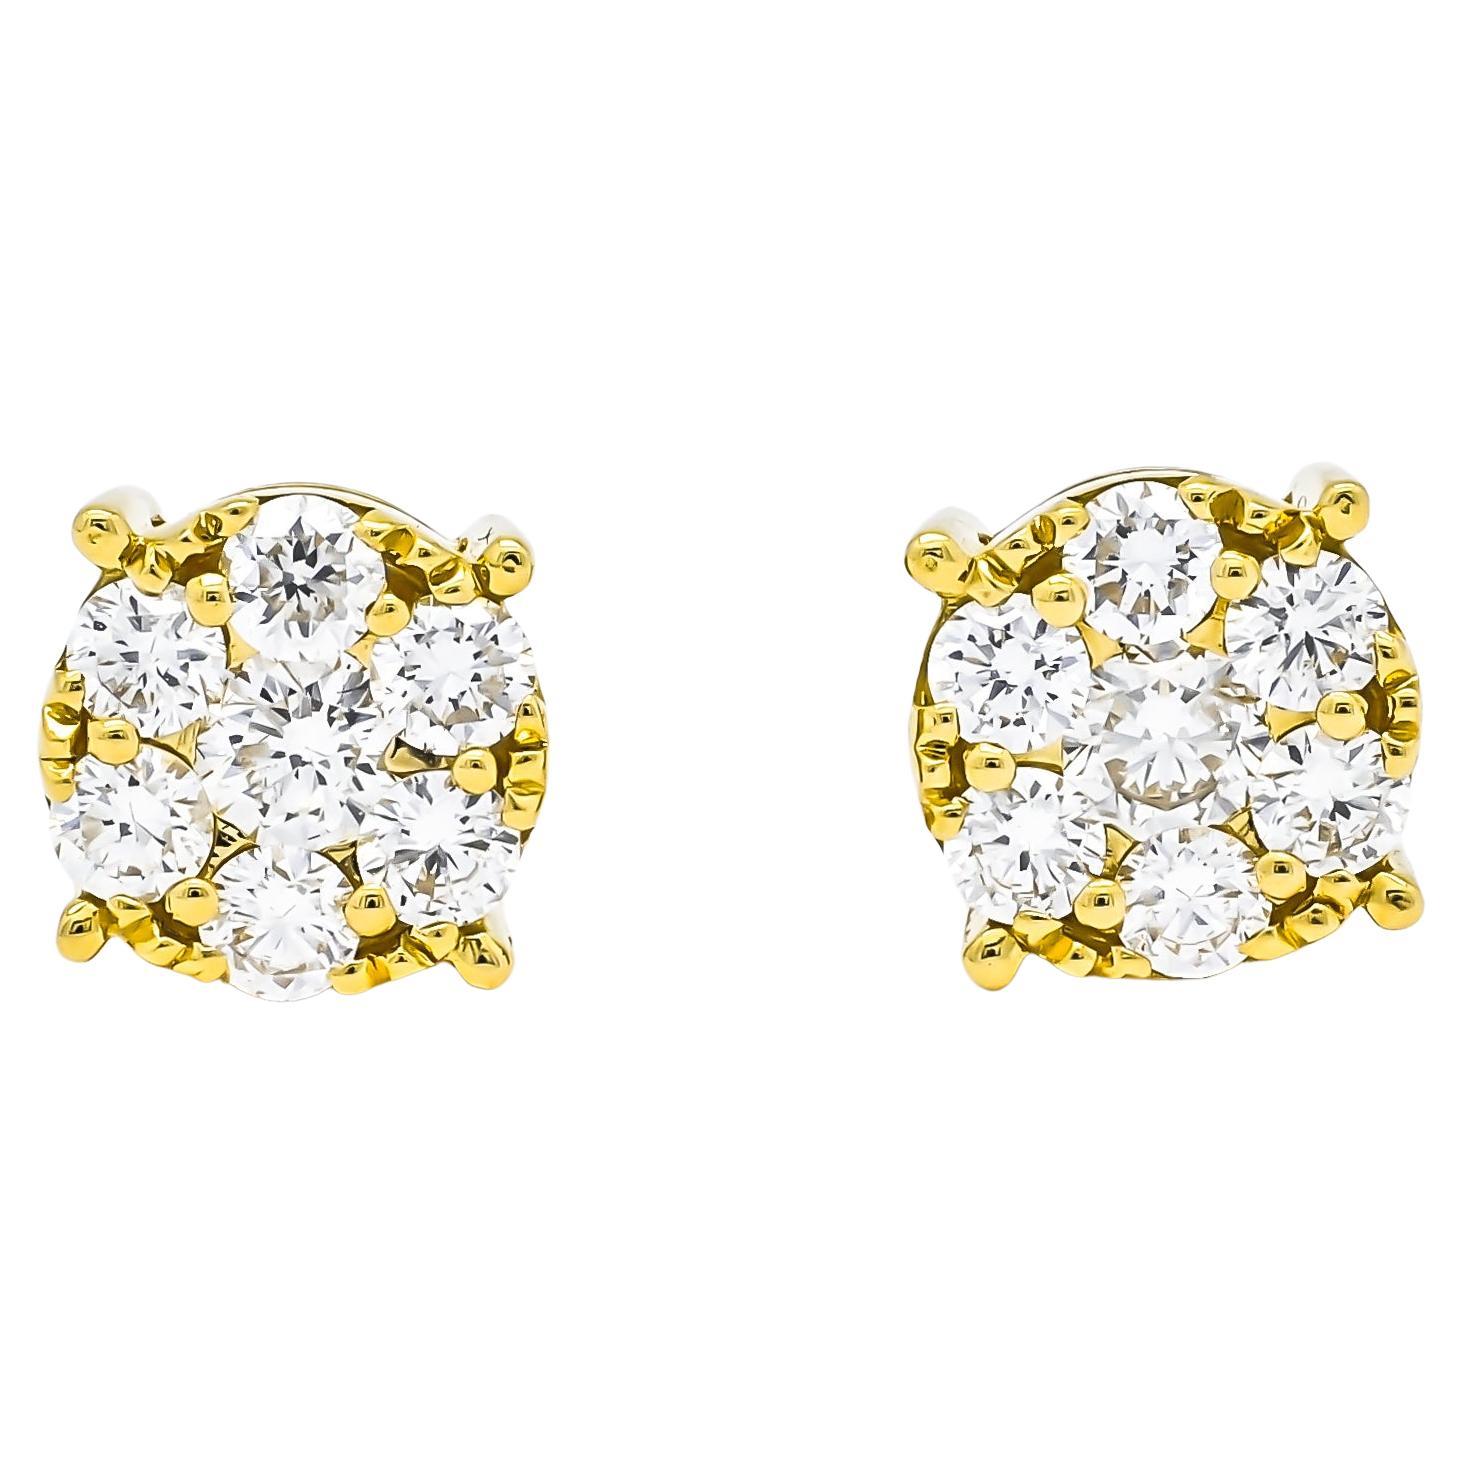 18KT Gold 4 Prong Classic Cluster Solitaire Natural Diamonds Earrings E064014-YG